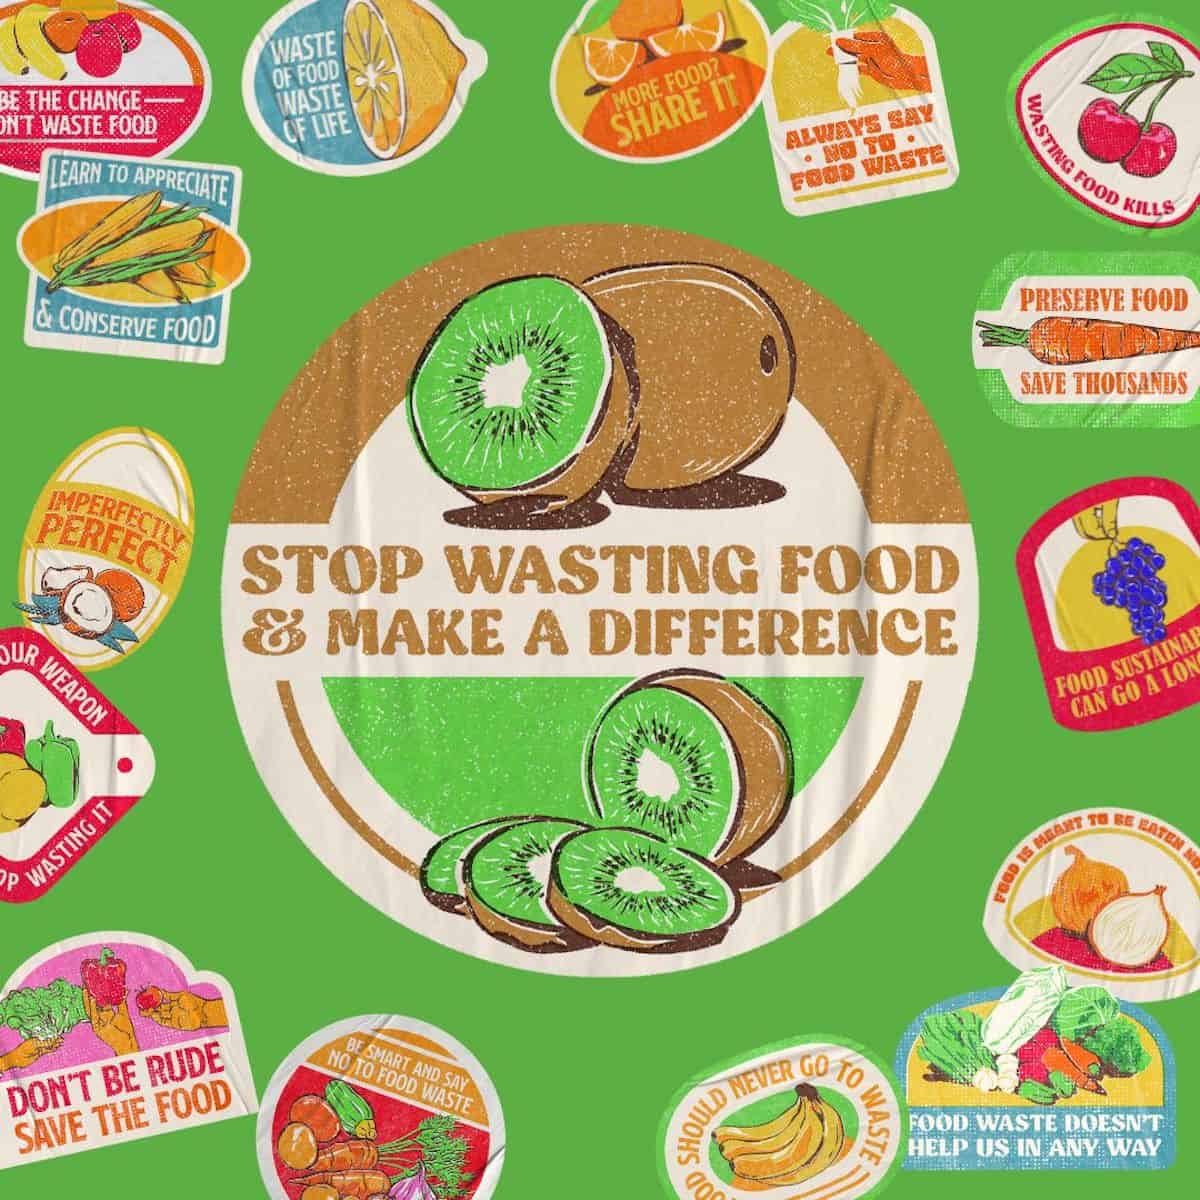 square cartoon image with a lime green background and stickers that read "stop wasting food & make a difference" and "don't be rude save the food" "be smart and say no to food waste" "preserve food save thousands."